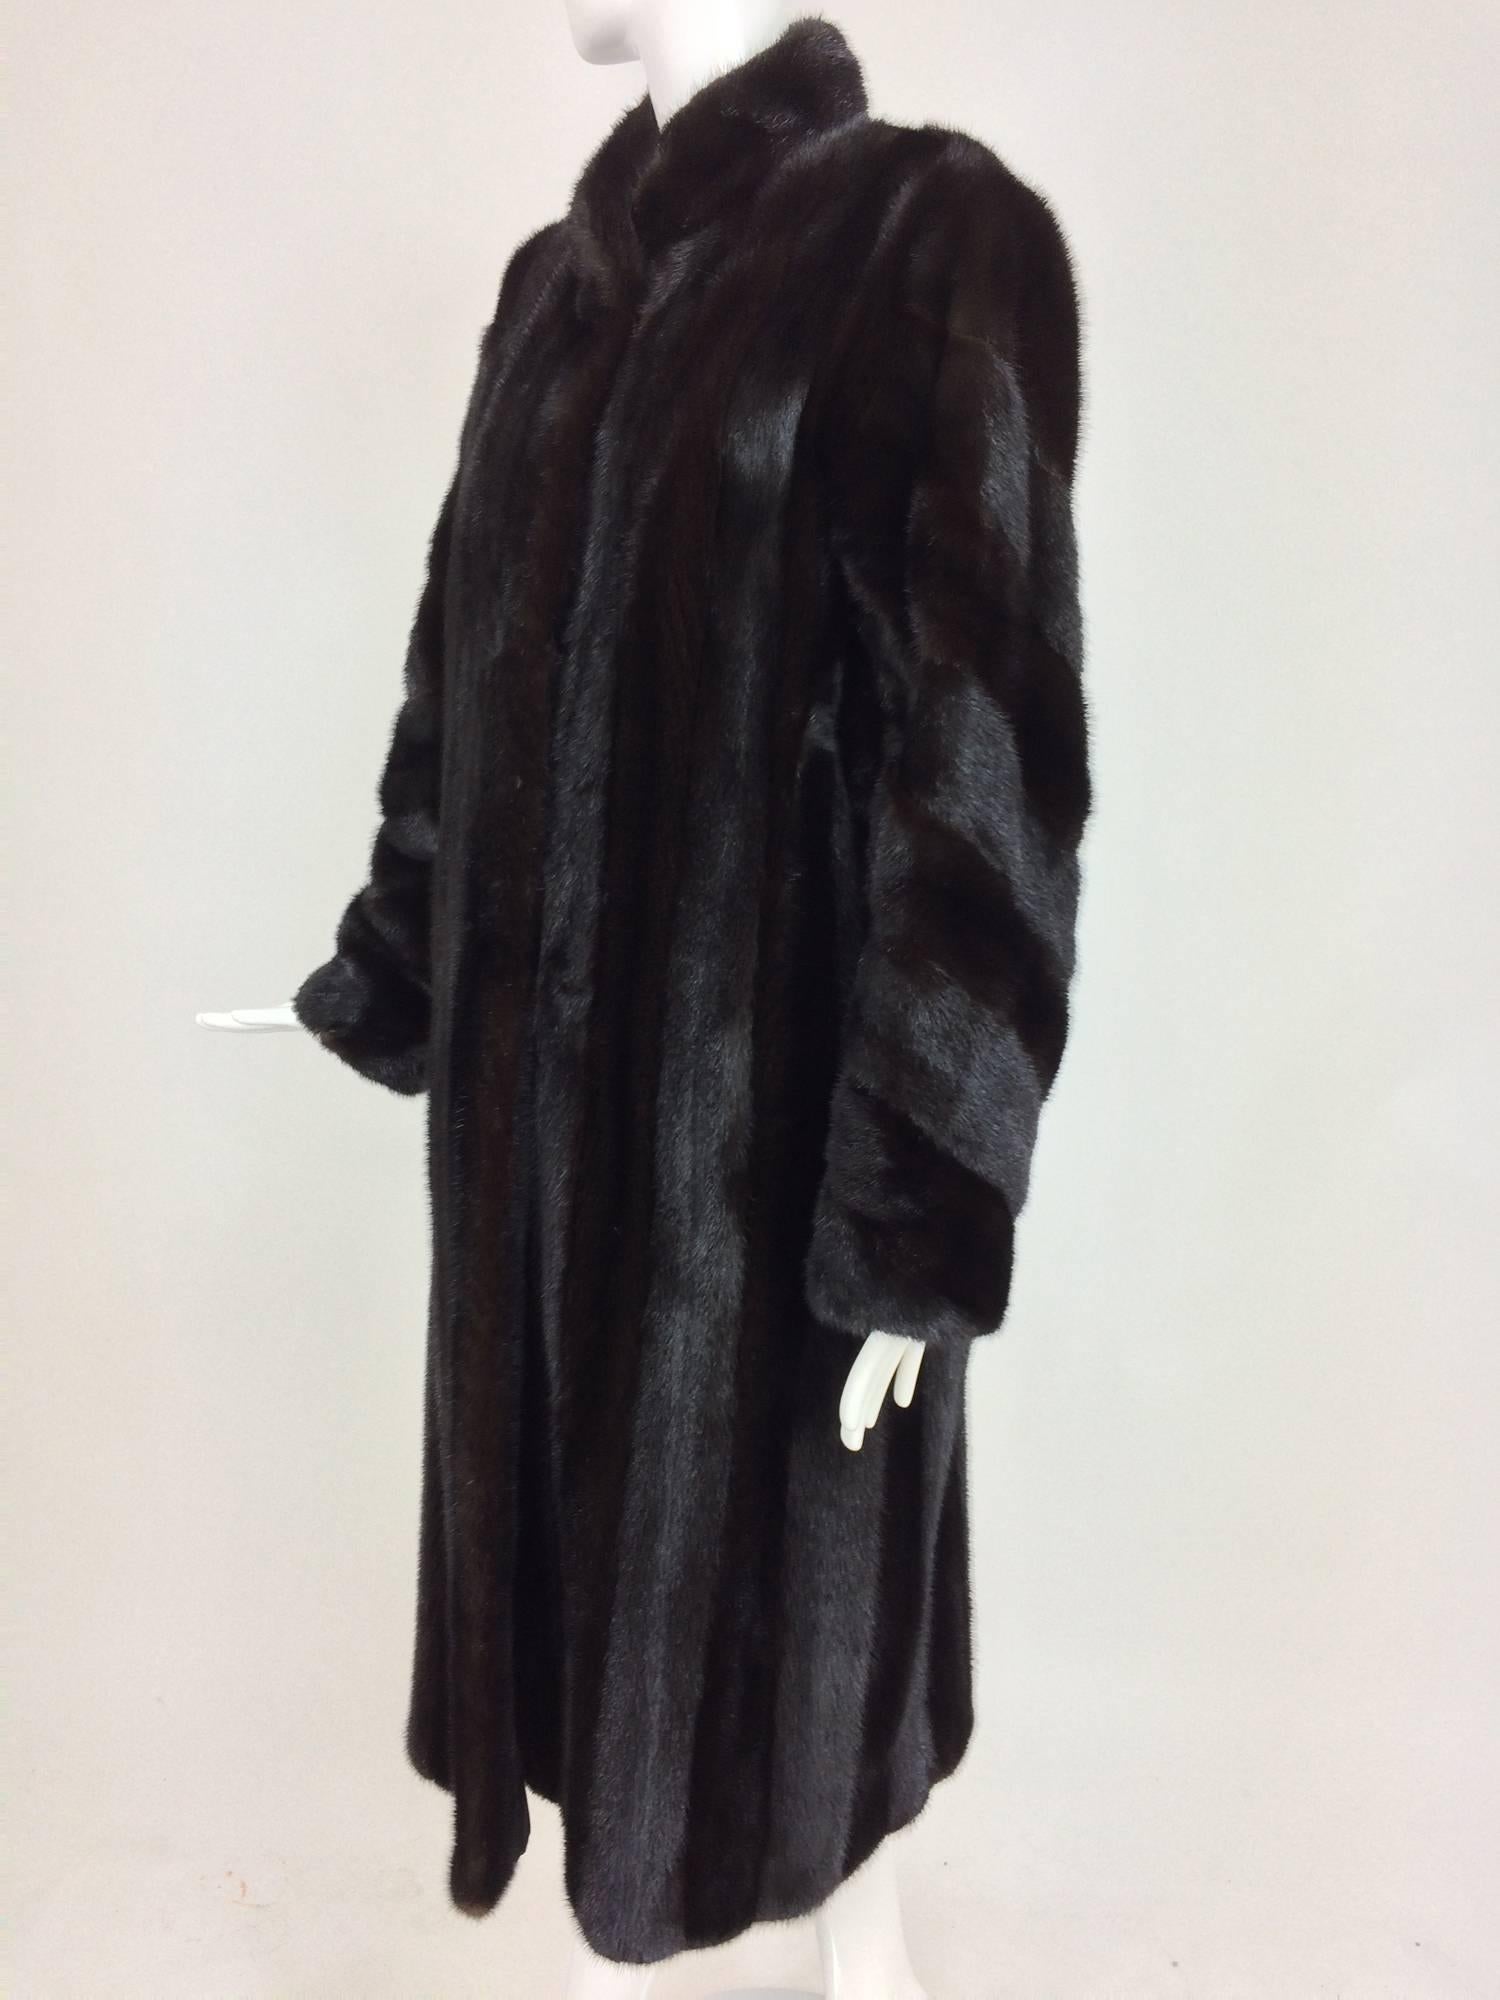 Birger Christensen Dark mink fur coat full length female skins...Birger Christensen is one of the finest furriers in the world...This beautiful coat is so soft, the fur is amazing and very very dark brown...The pelts are set in a vertical stripe,